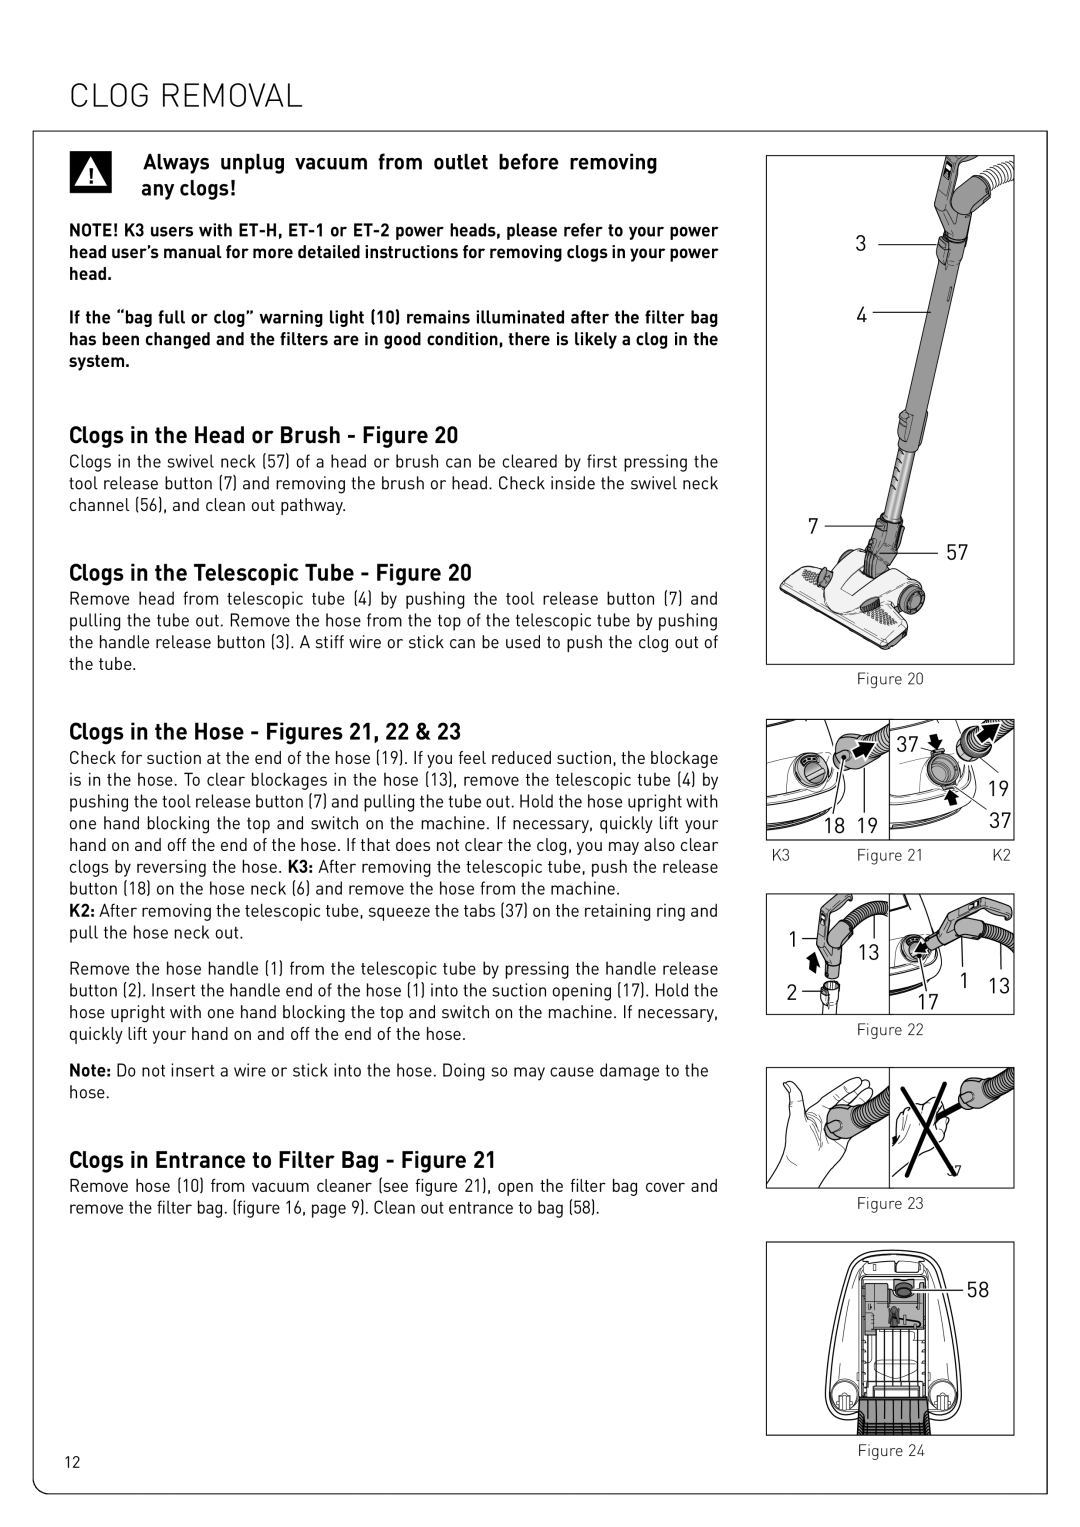 Sebo K3, K2 owner manual Clog Removal, Clogs in the Head or Brush - Figure, Clogs in the Telescopic Tube - Figure, any clogs 